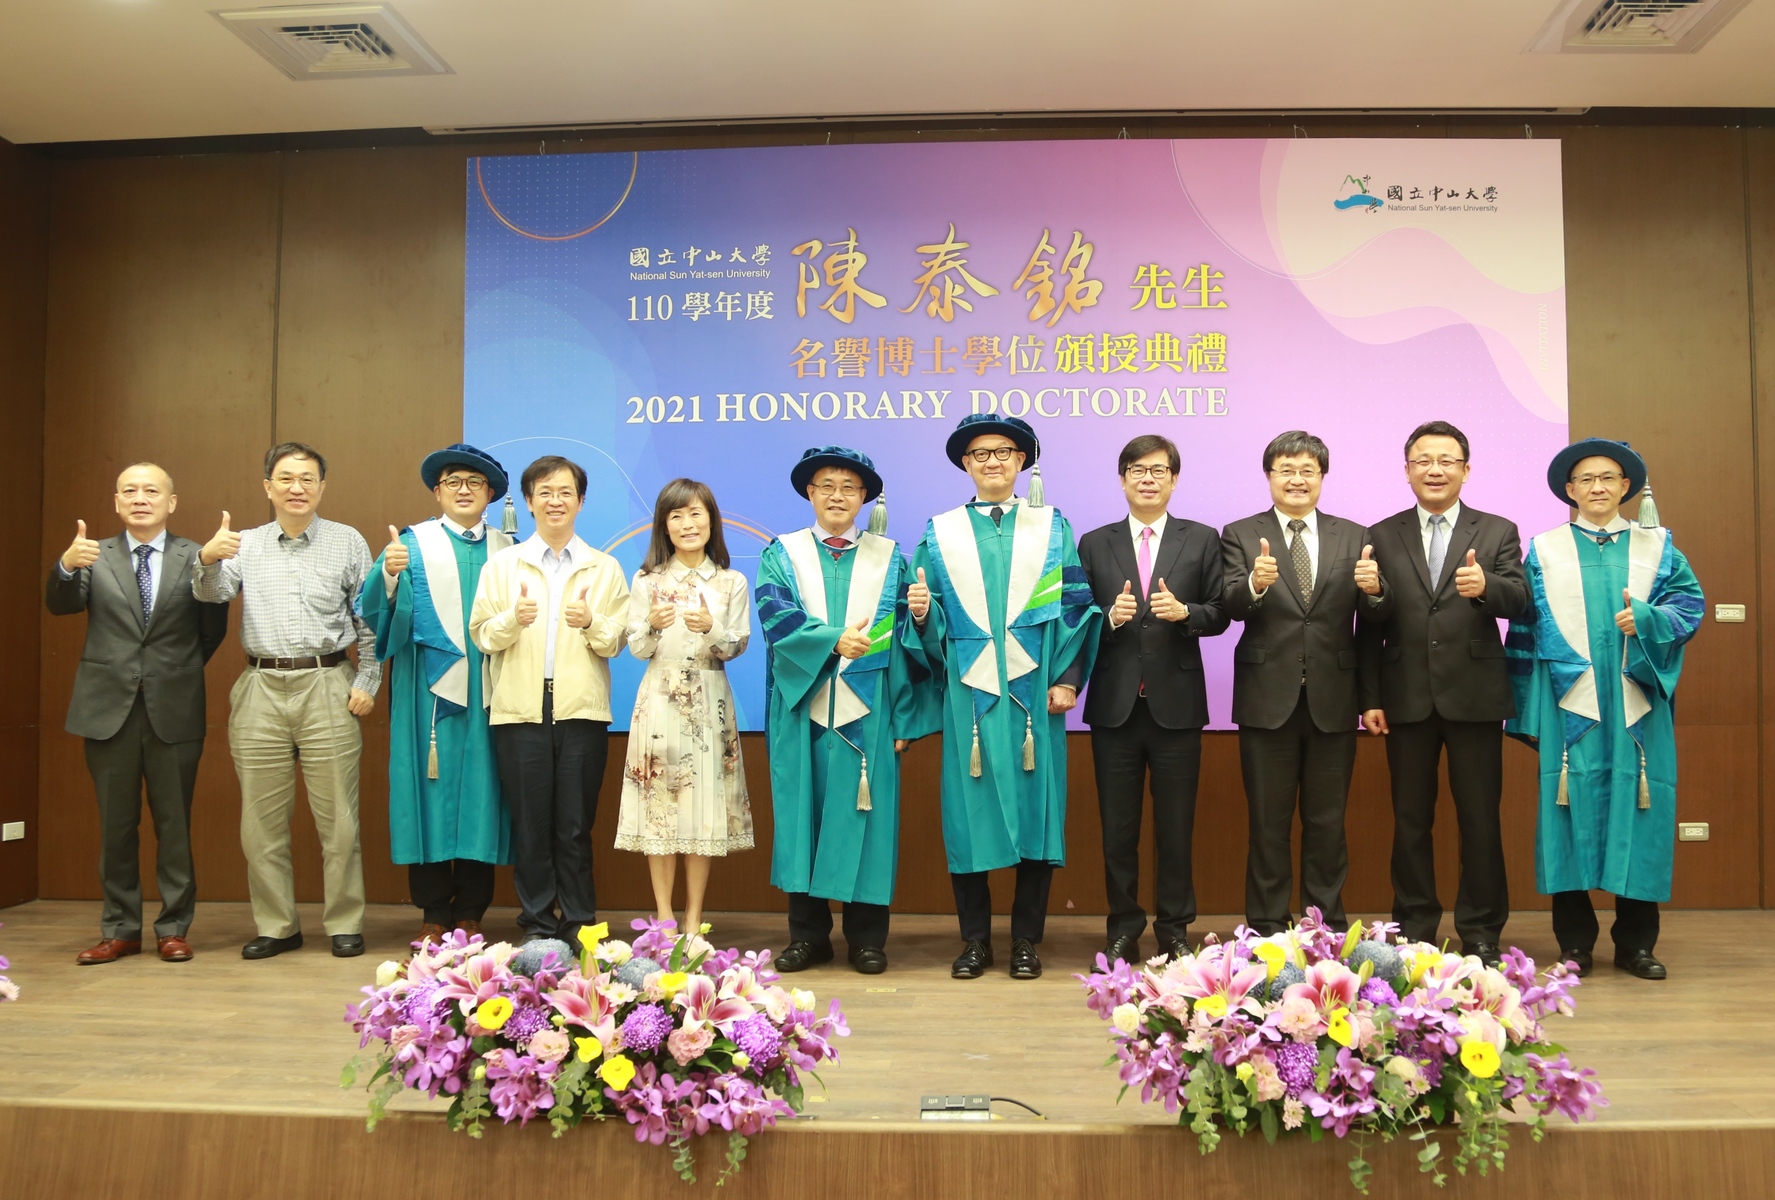 Yageo Chairman Tie-Min Chen awarded Honorary Doctorate in Management